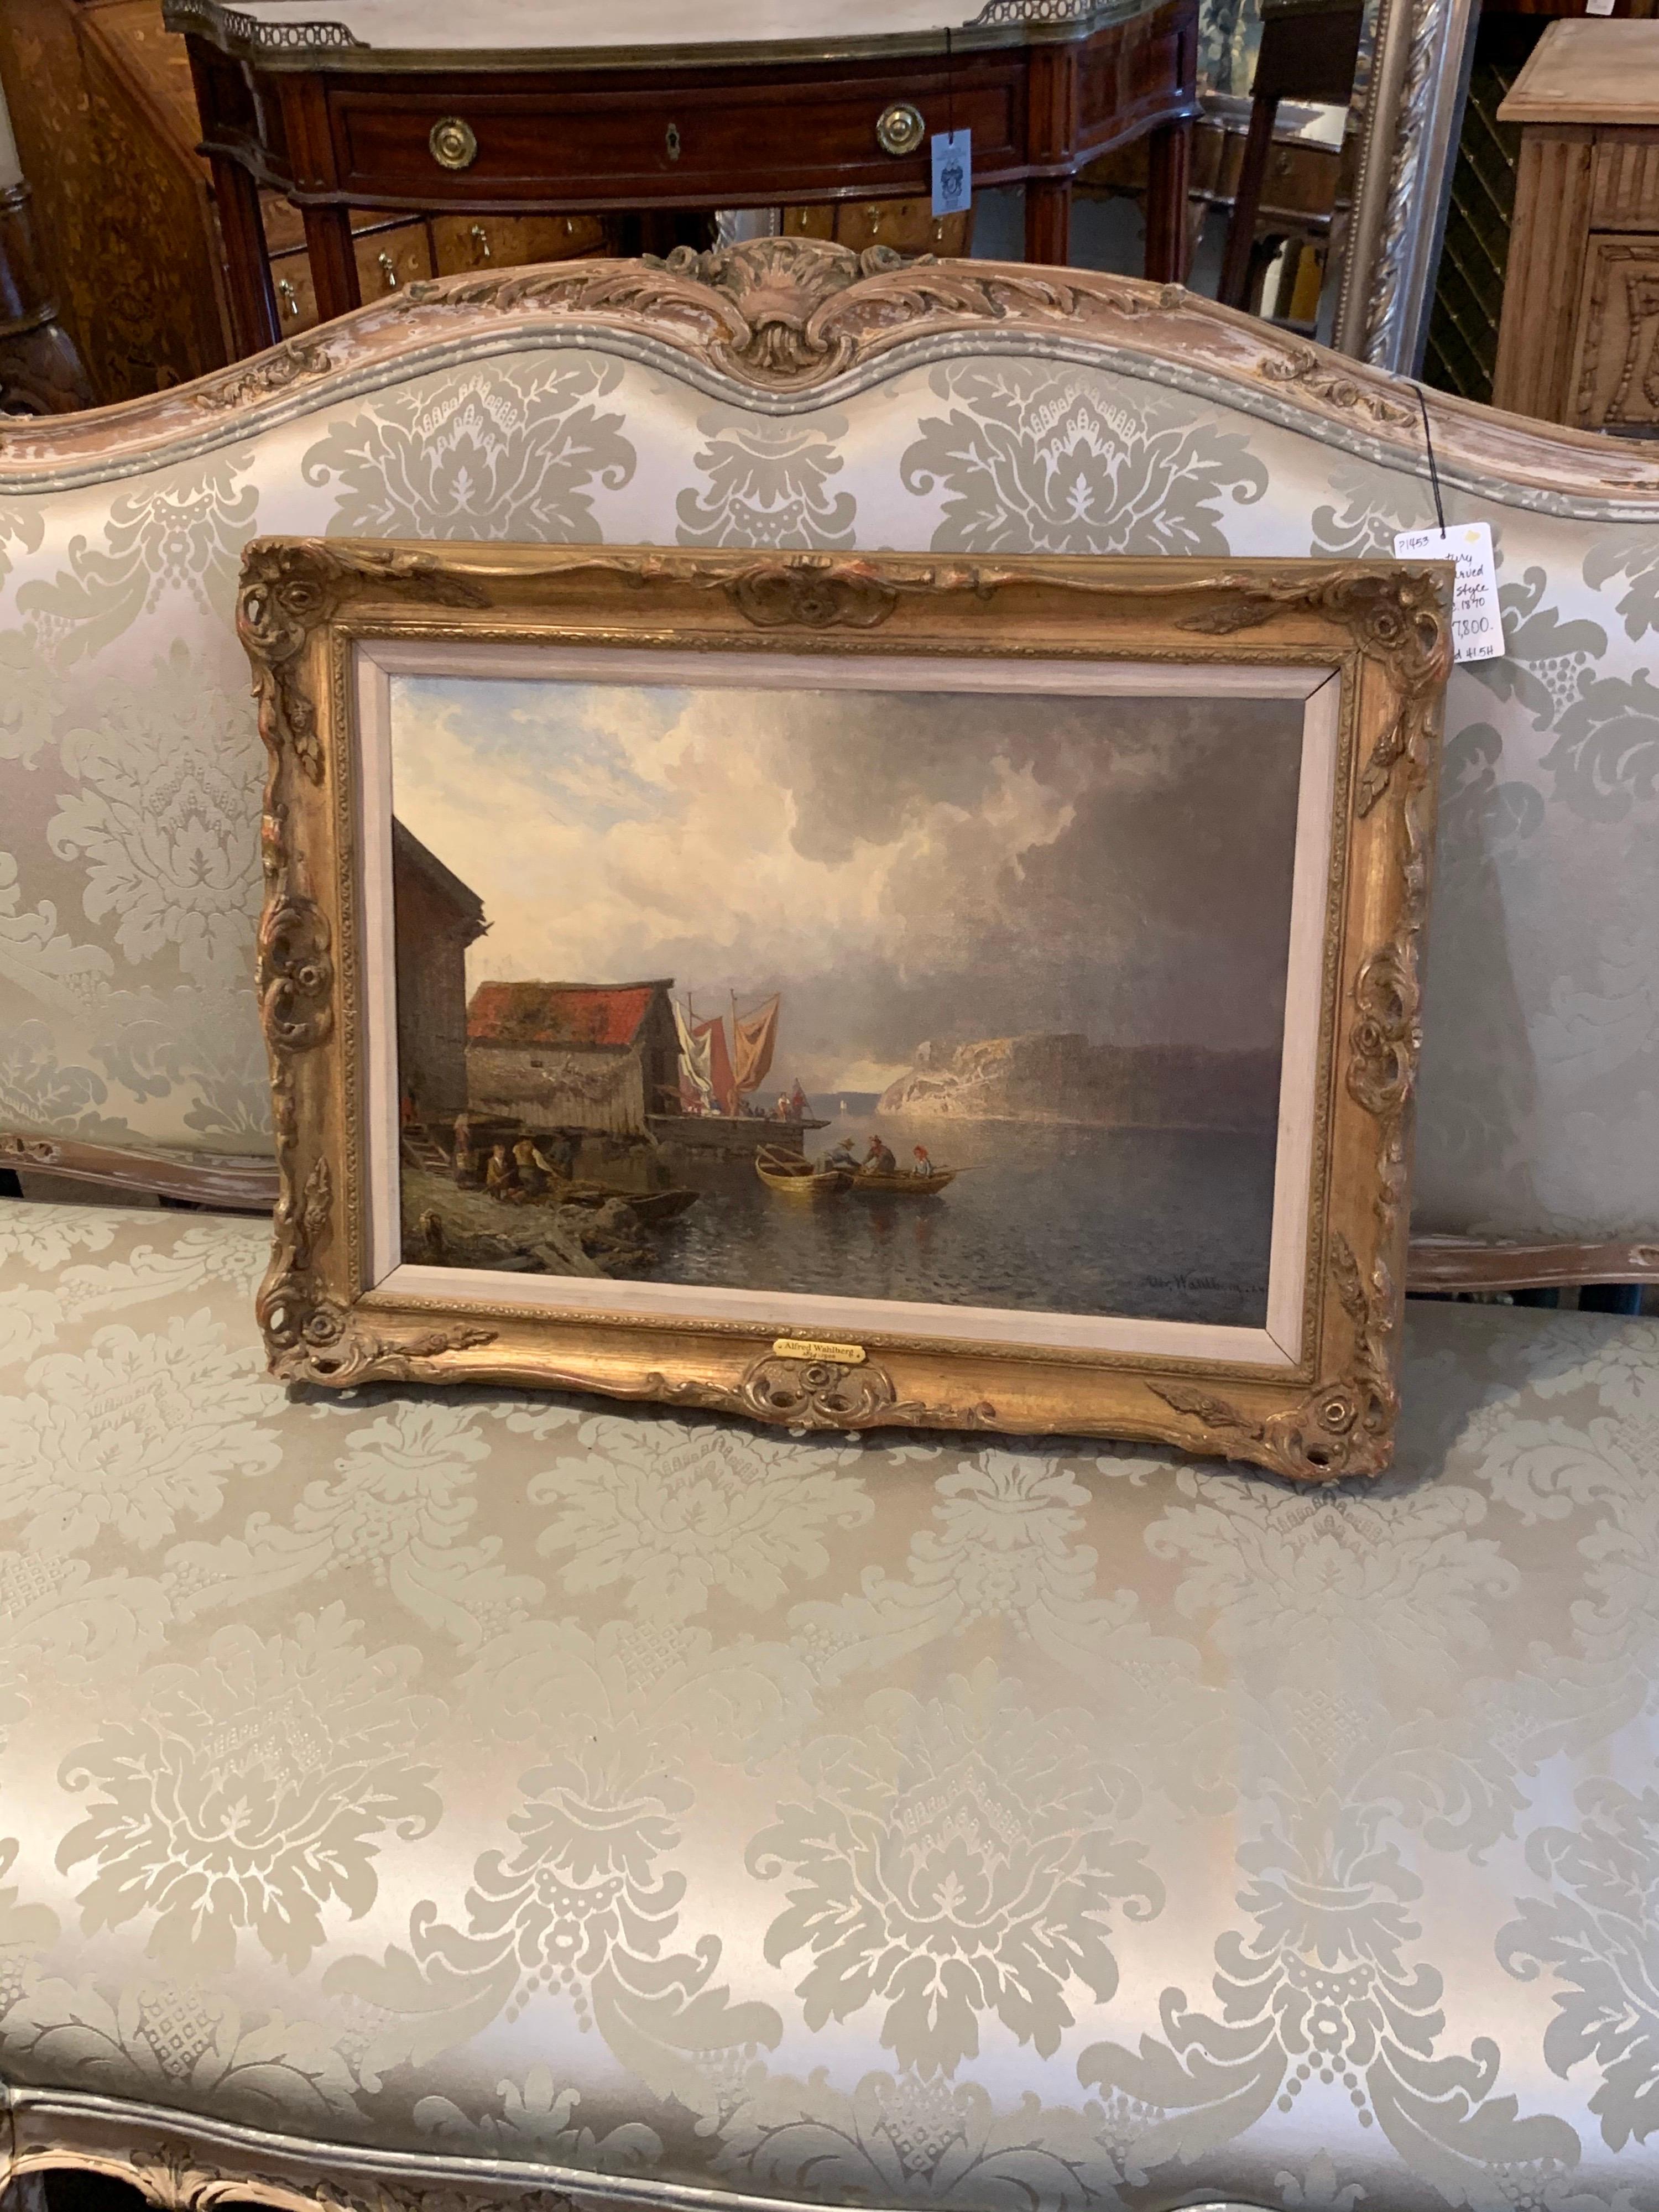 Very fine 19th century oil on canvas painting by Swedish artist Alfred Whalberg. This painting depicts a tranquil harbor scene. Beautiful details and colors on this painting. A lovely piece of art in nice carved giltwood frame!